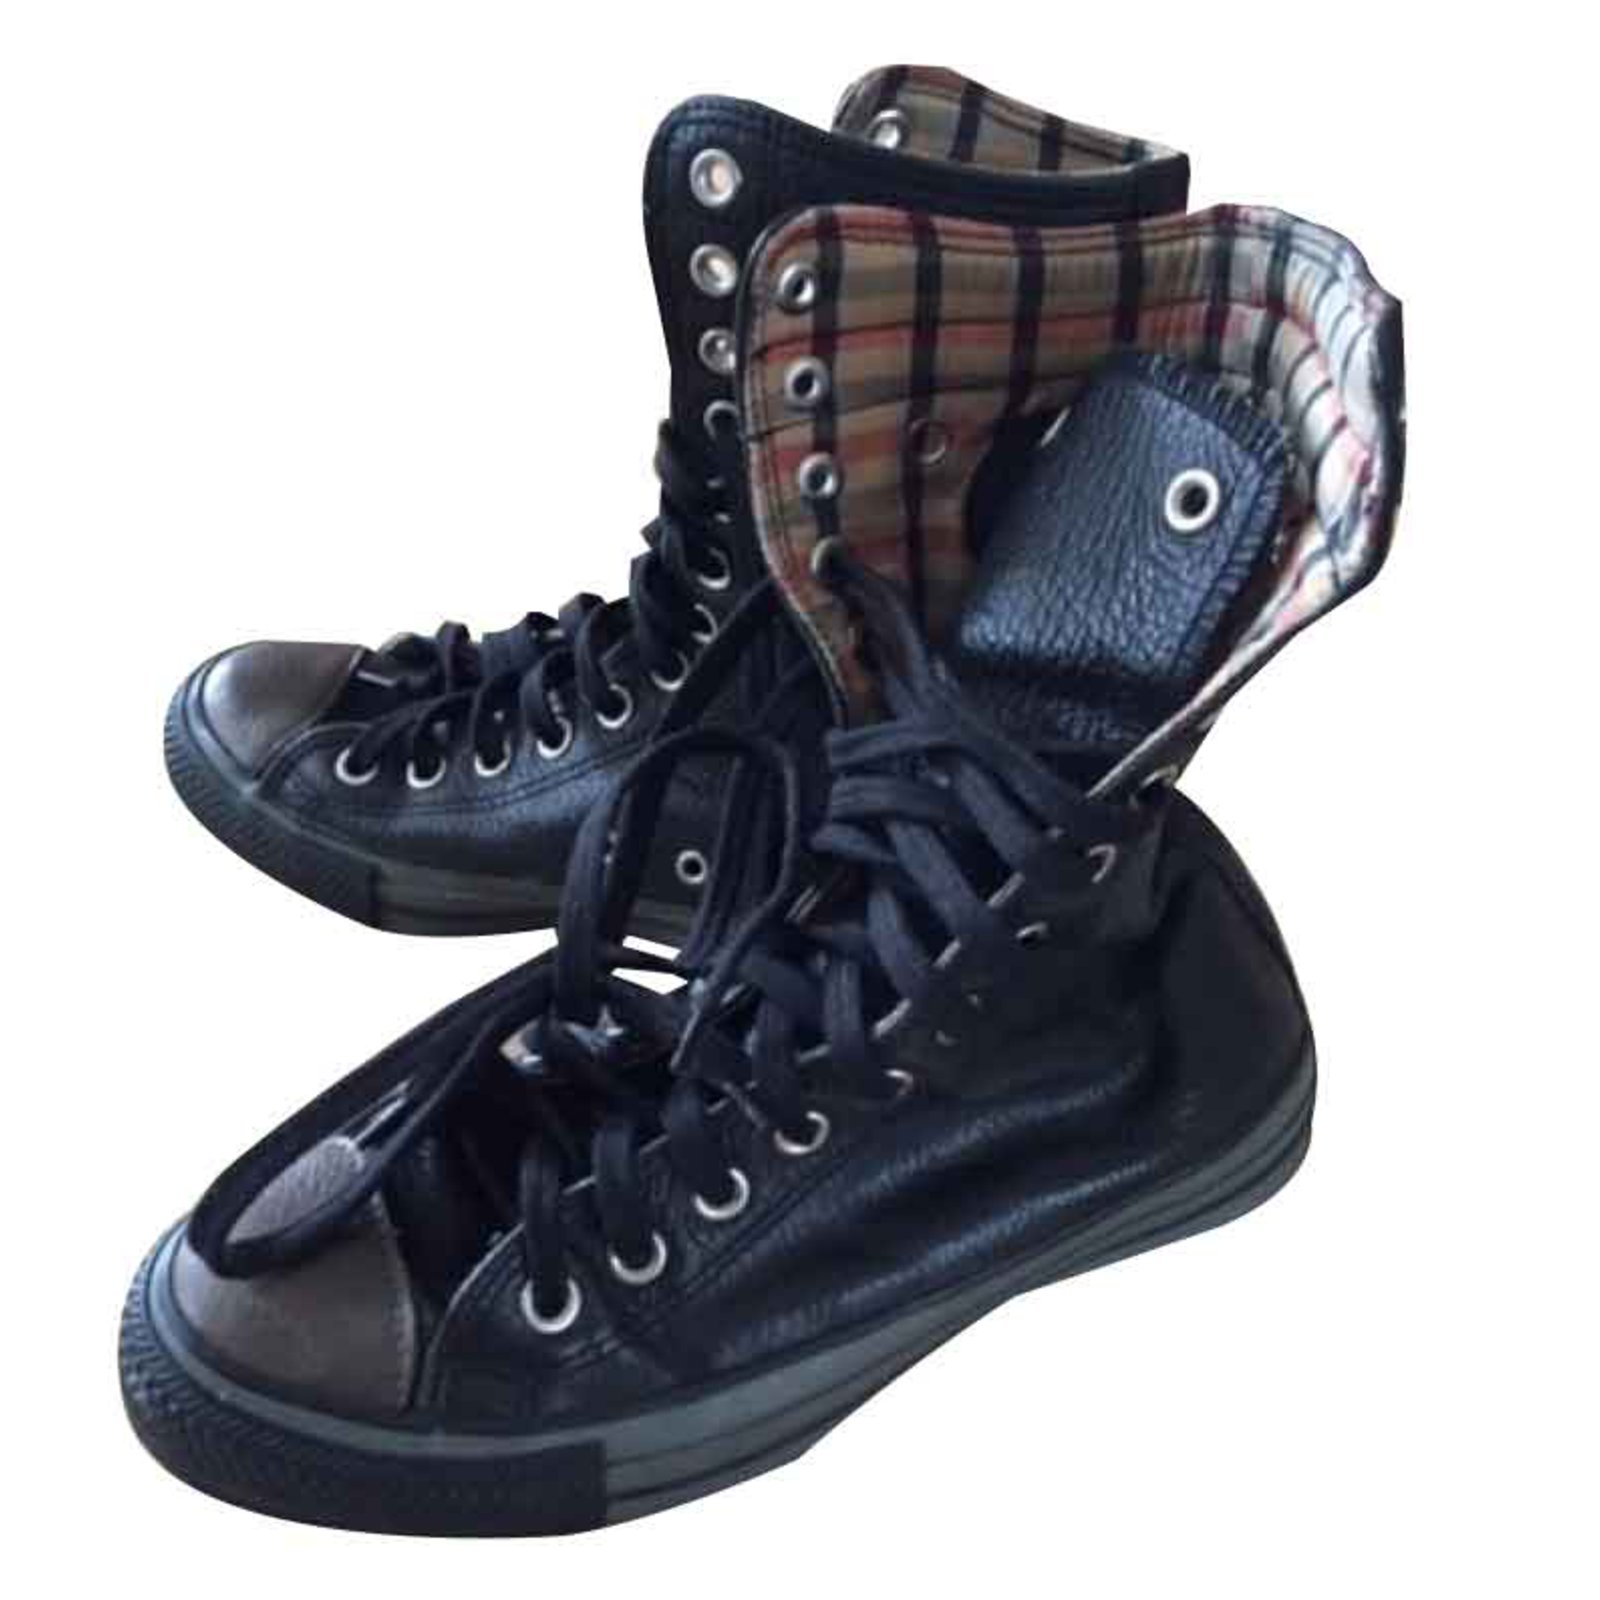 converse black leather boots